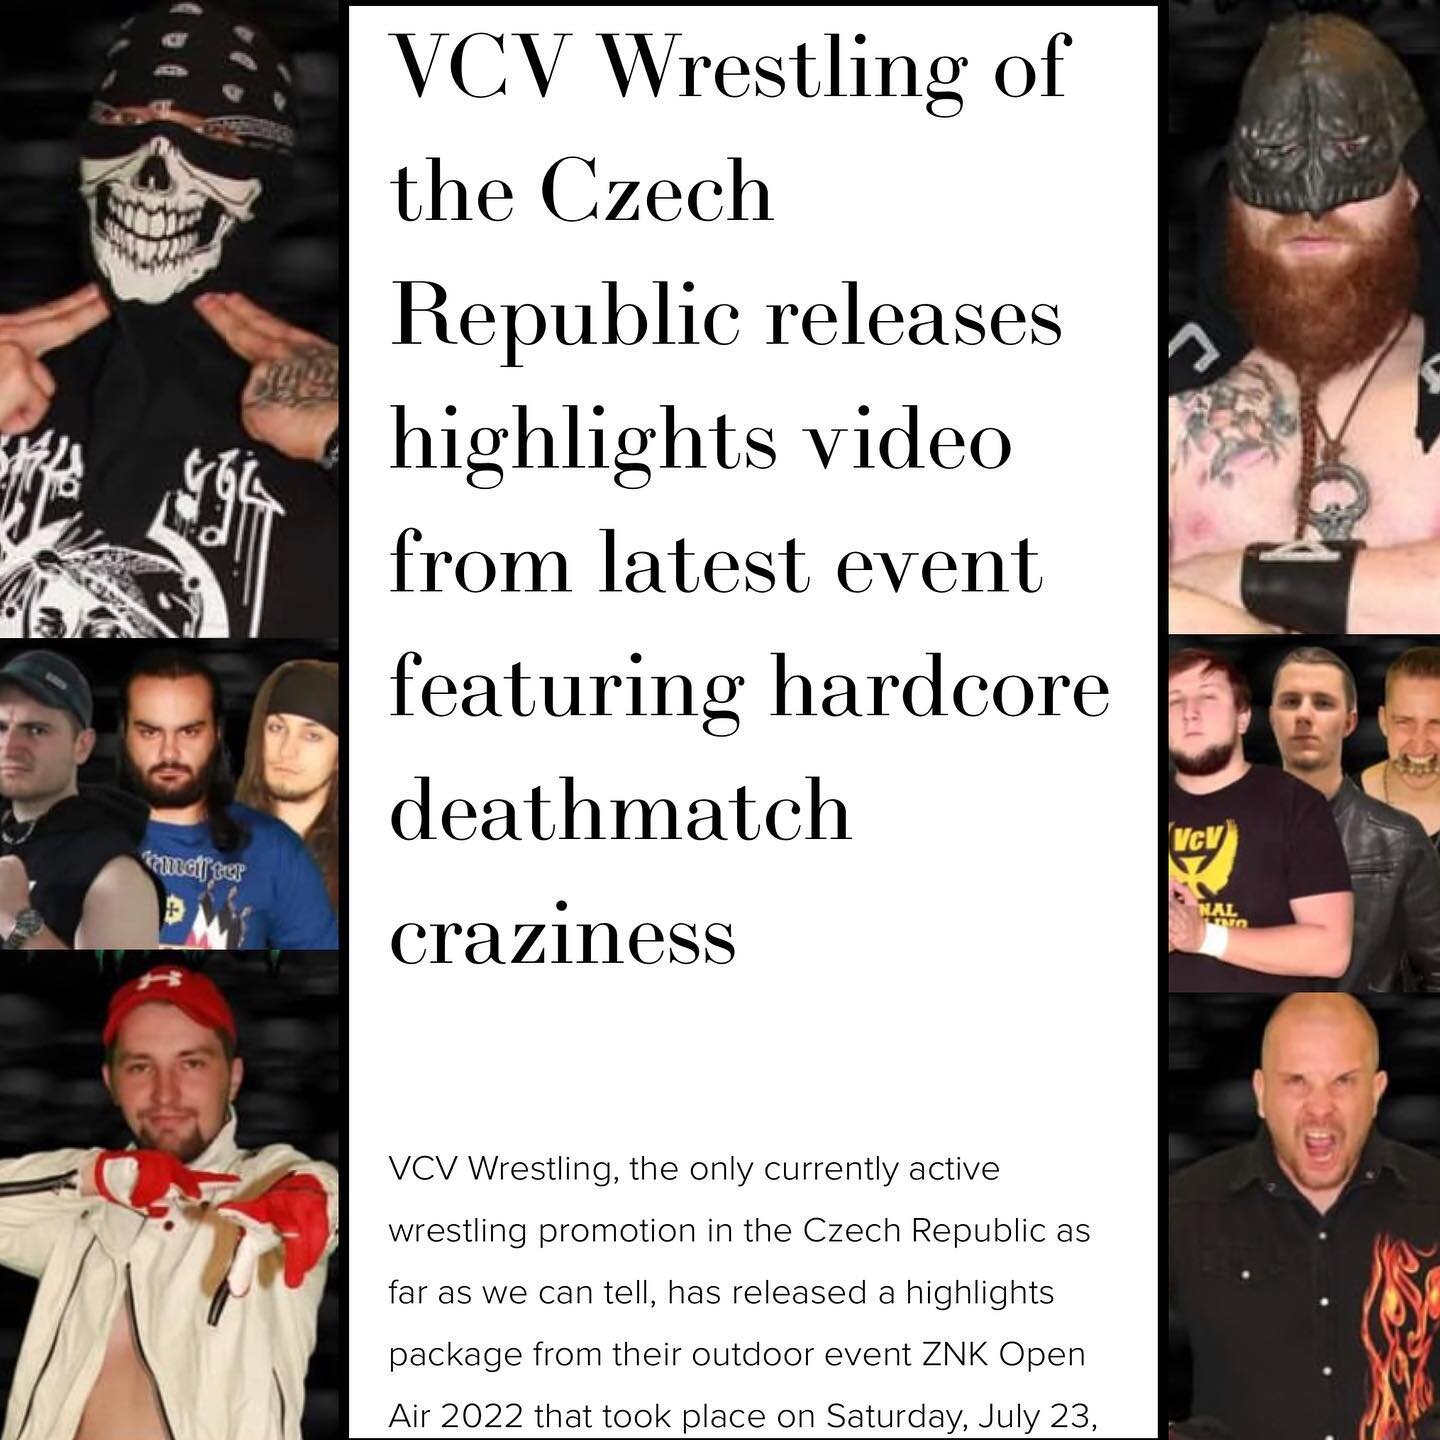 New on wrestlemap.com!  @vcv_wrestling, the only active wrestling promotion in the Czech Republic, releases highlights from outdoor event featuring hardcore deathmatch craziness!

  _____________________________ 

#wrestling #prowrestling #prowrestle